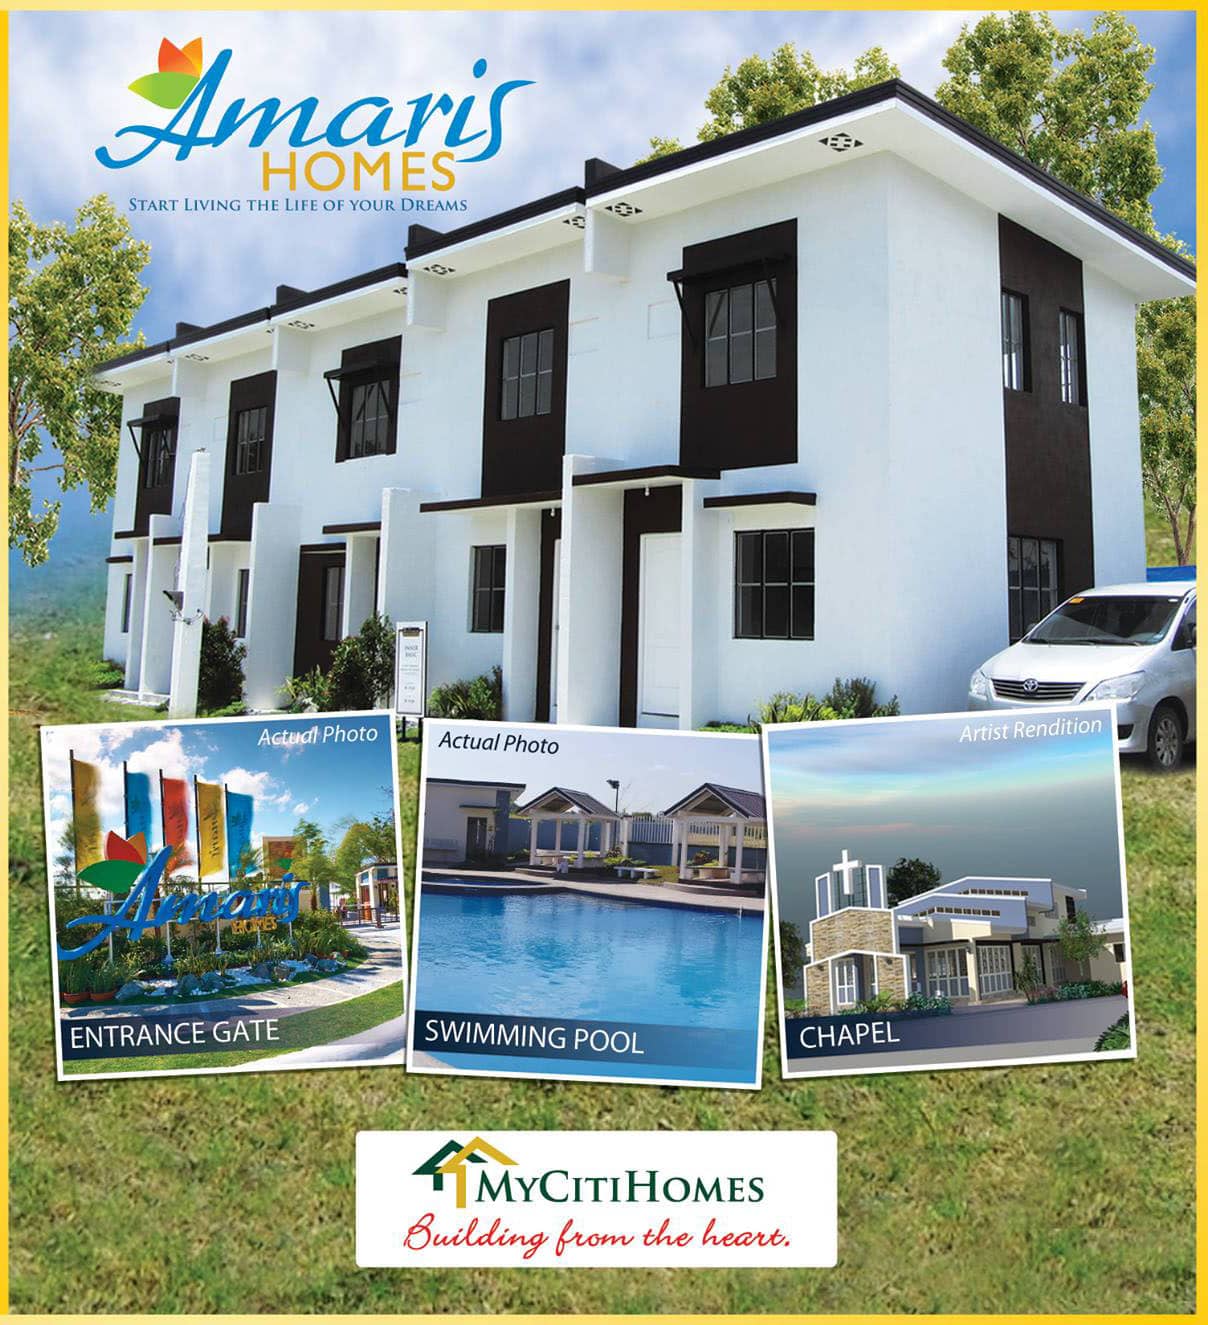 Amaris Homes - Two Storey Townhomes in Molino, Bacoor City, Cavite